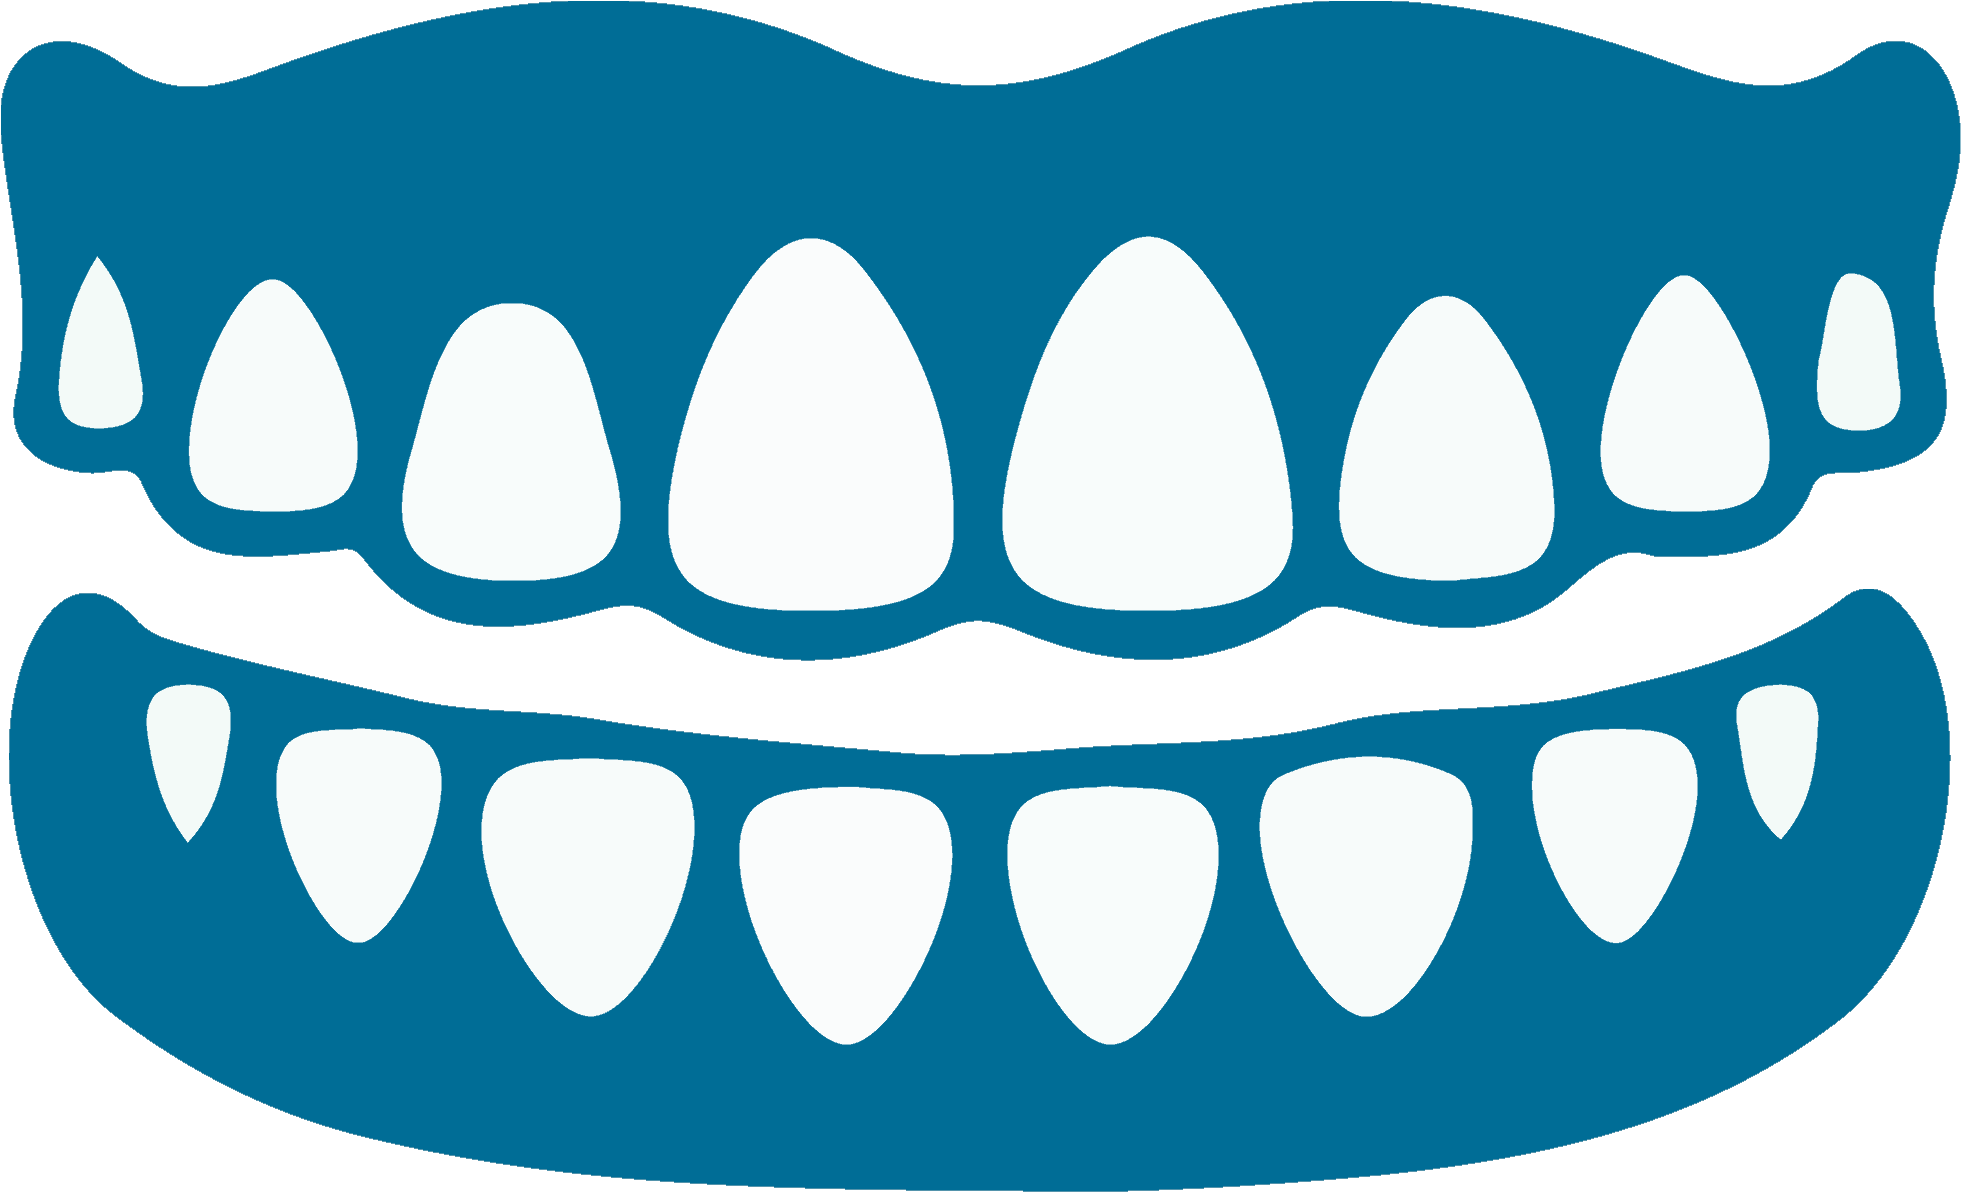 Get Your Teeth Back - Dentures Icon Transparent White - (1971x1202) Png Cli...